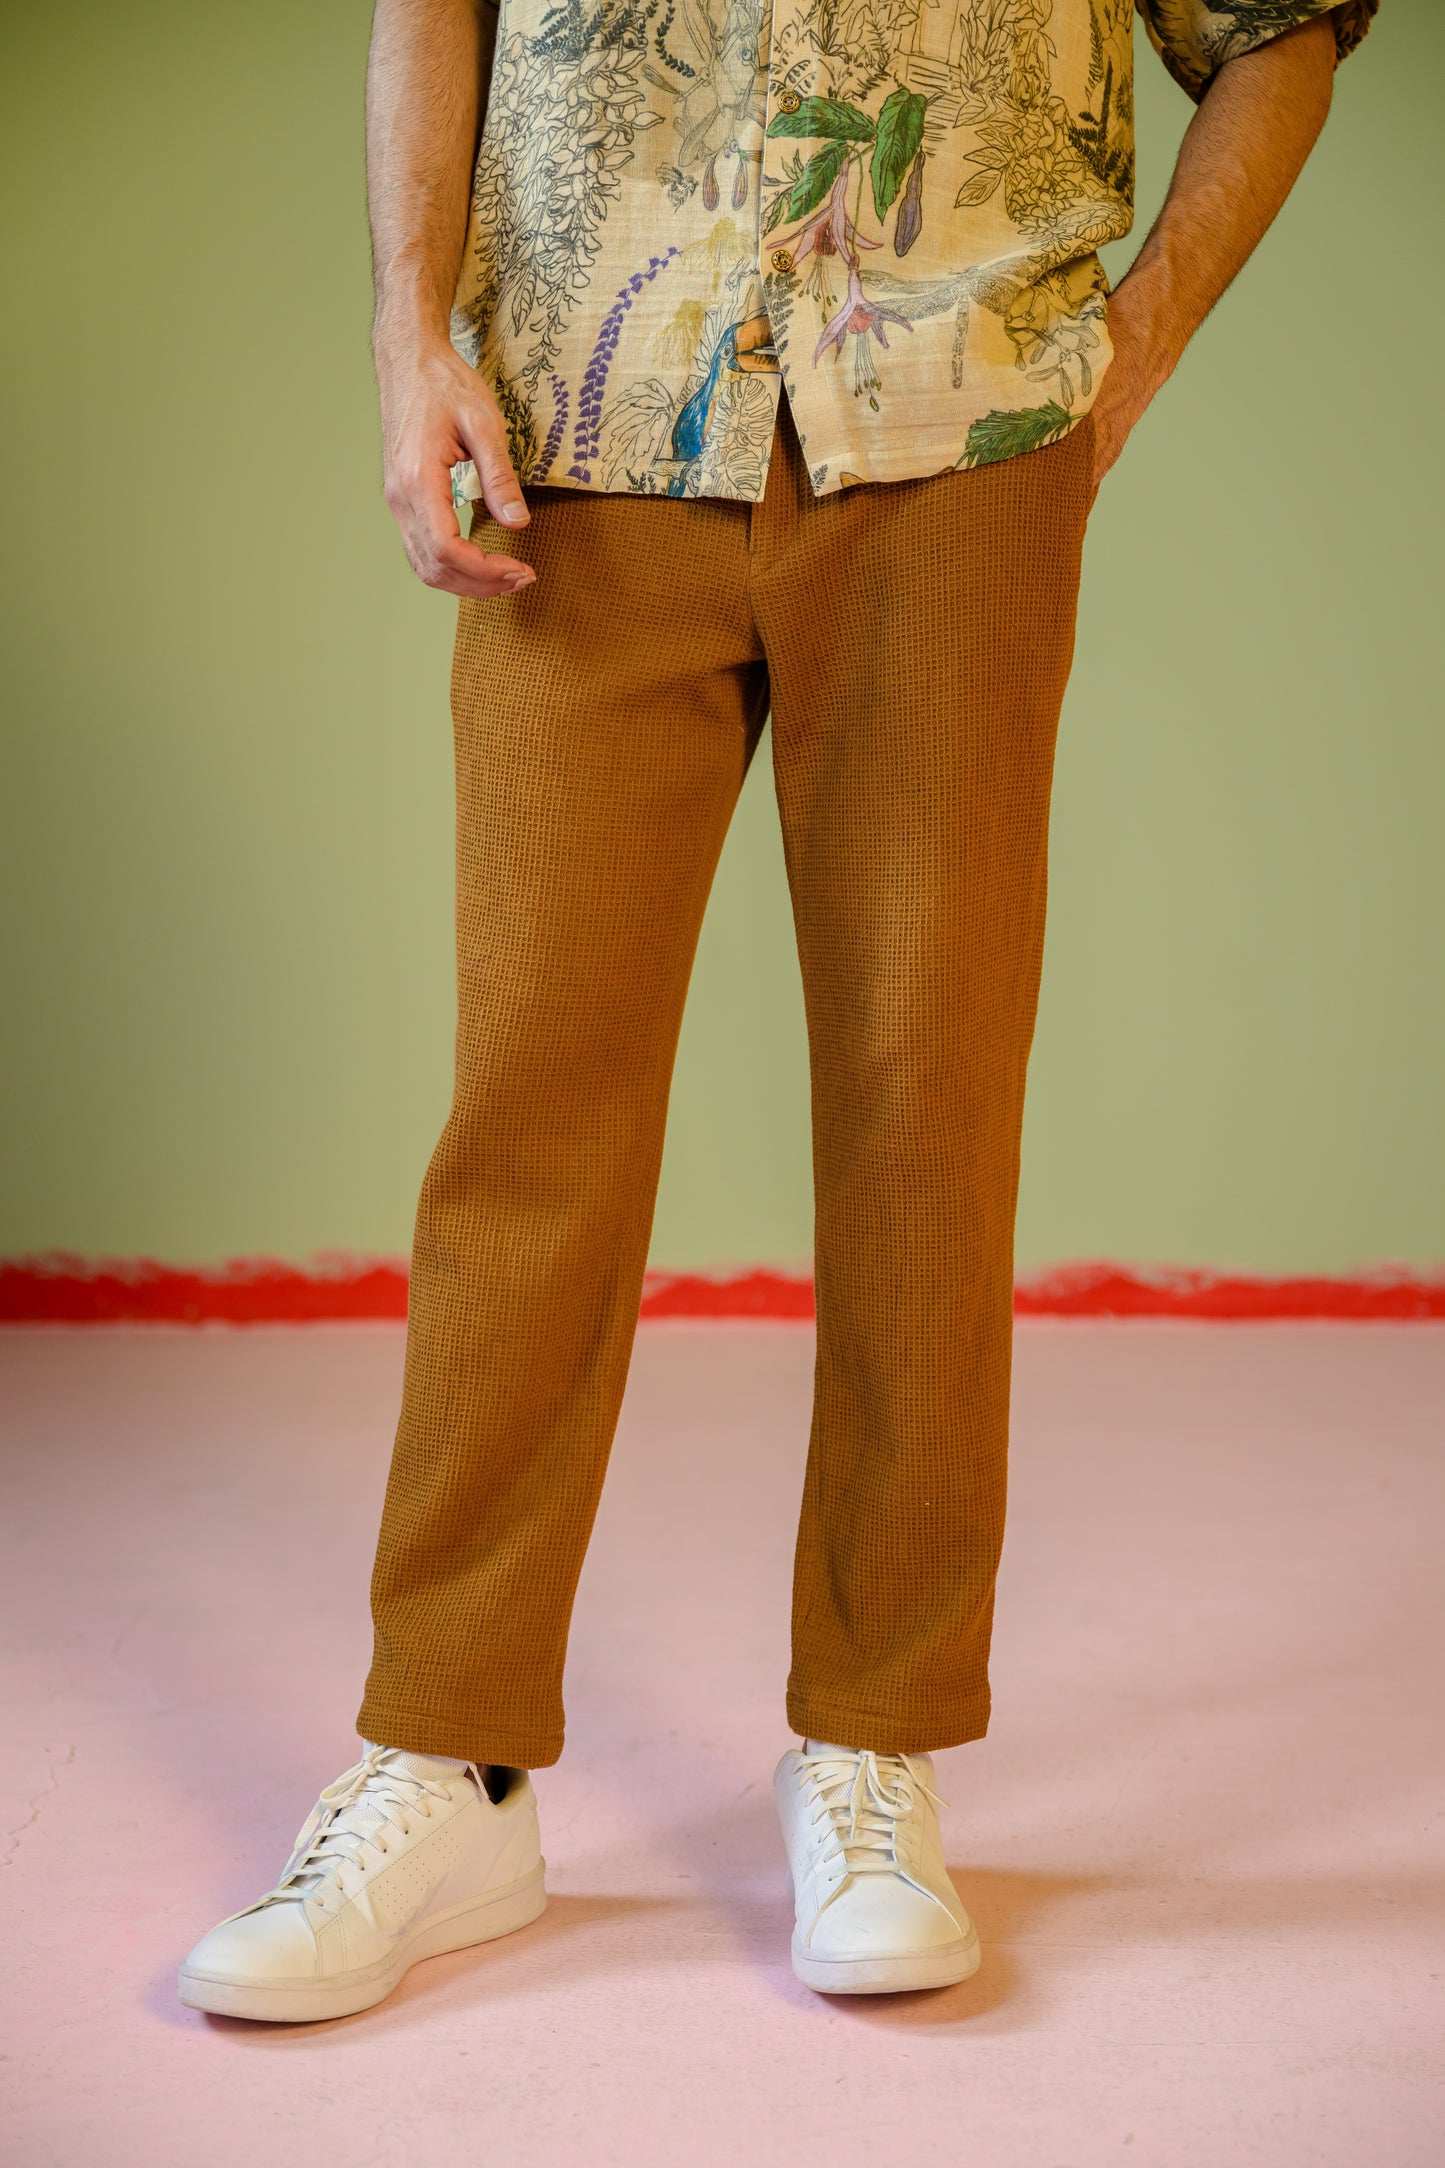 DEER HALF SLEEVE SHIRT PAIRED WITH CAMEL PANT SET